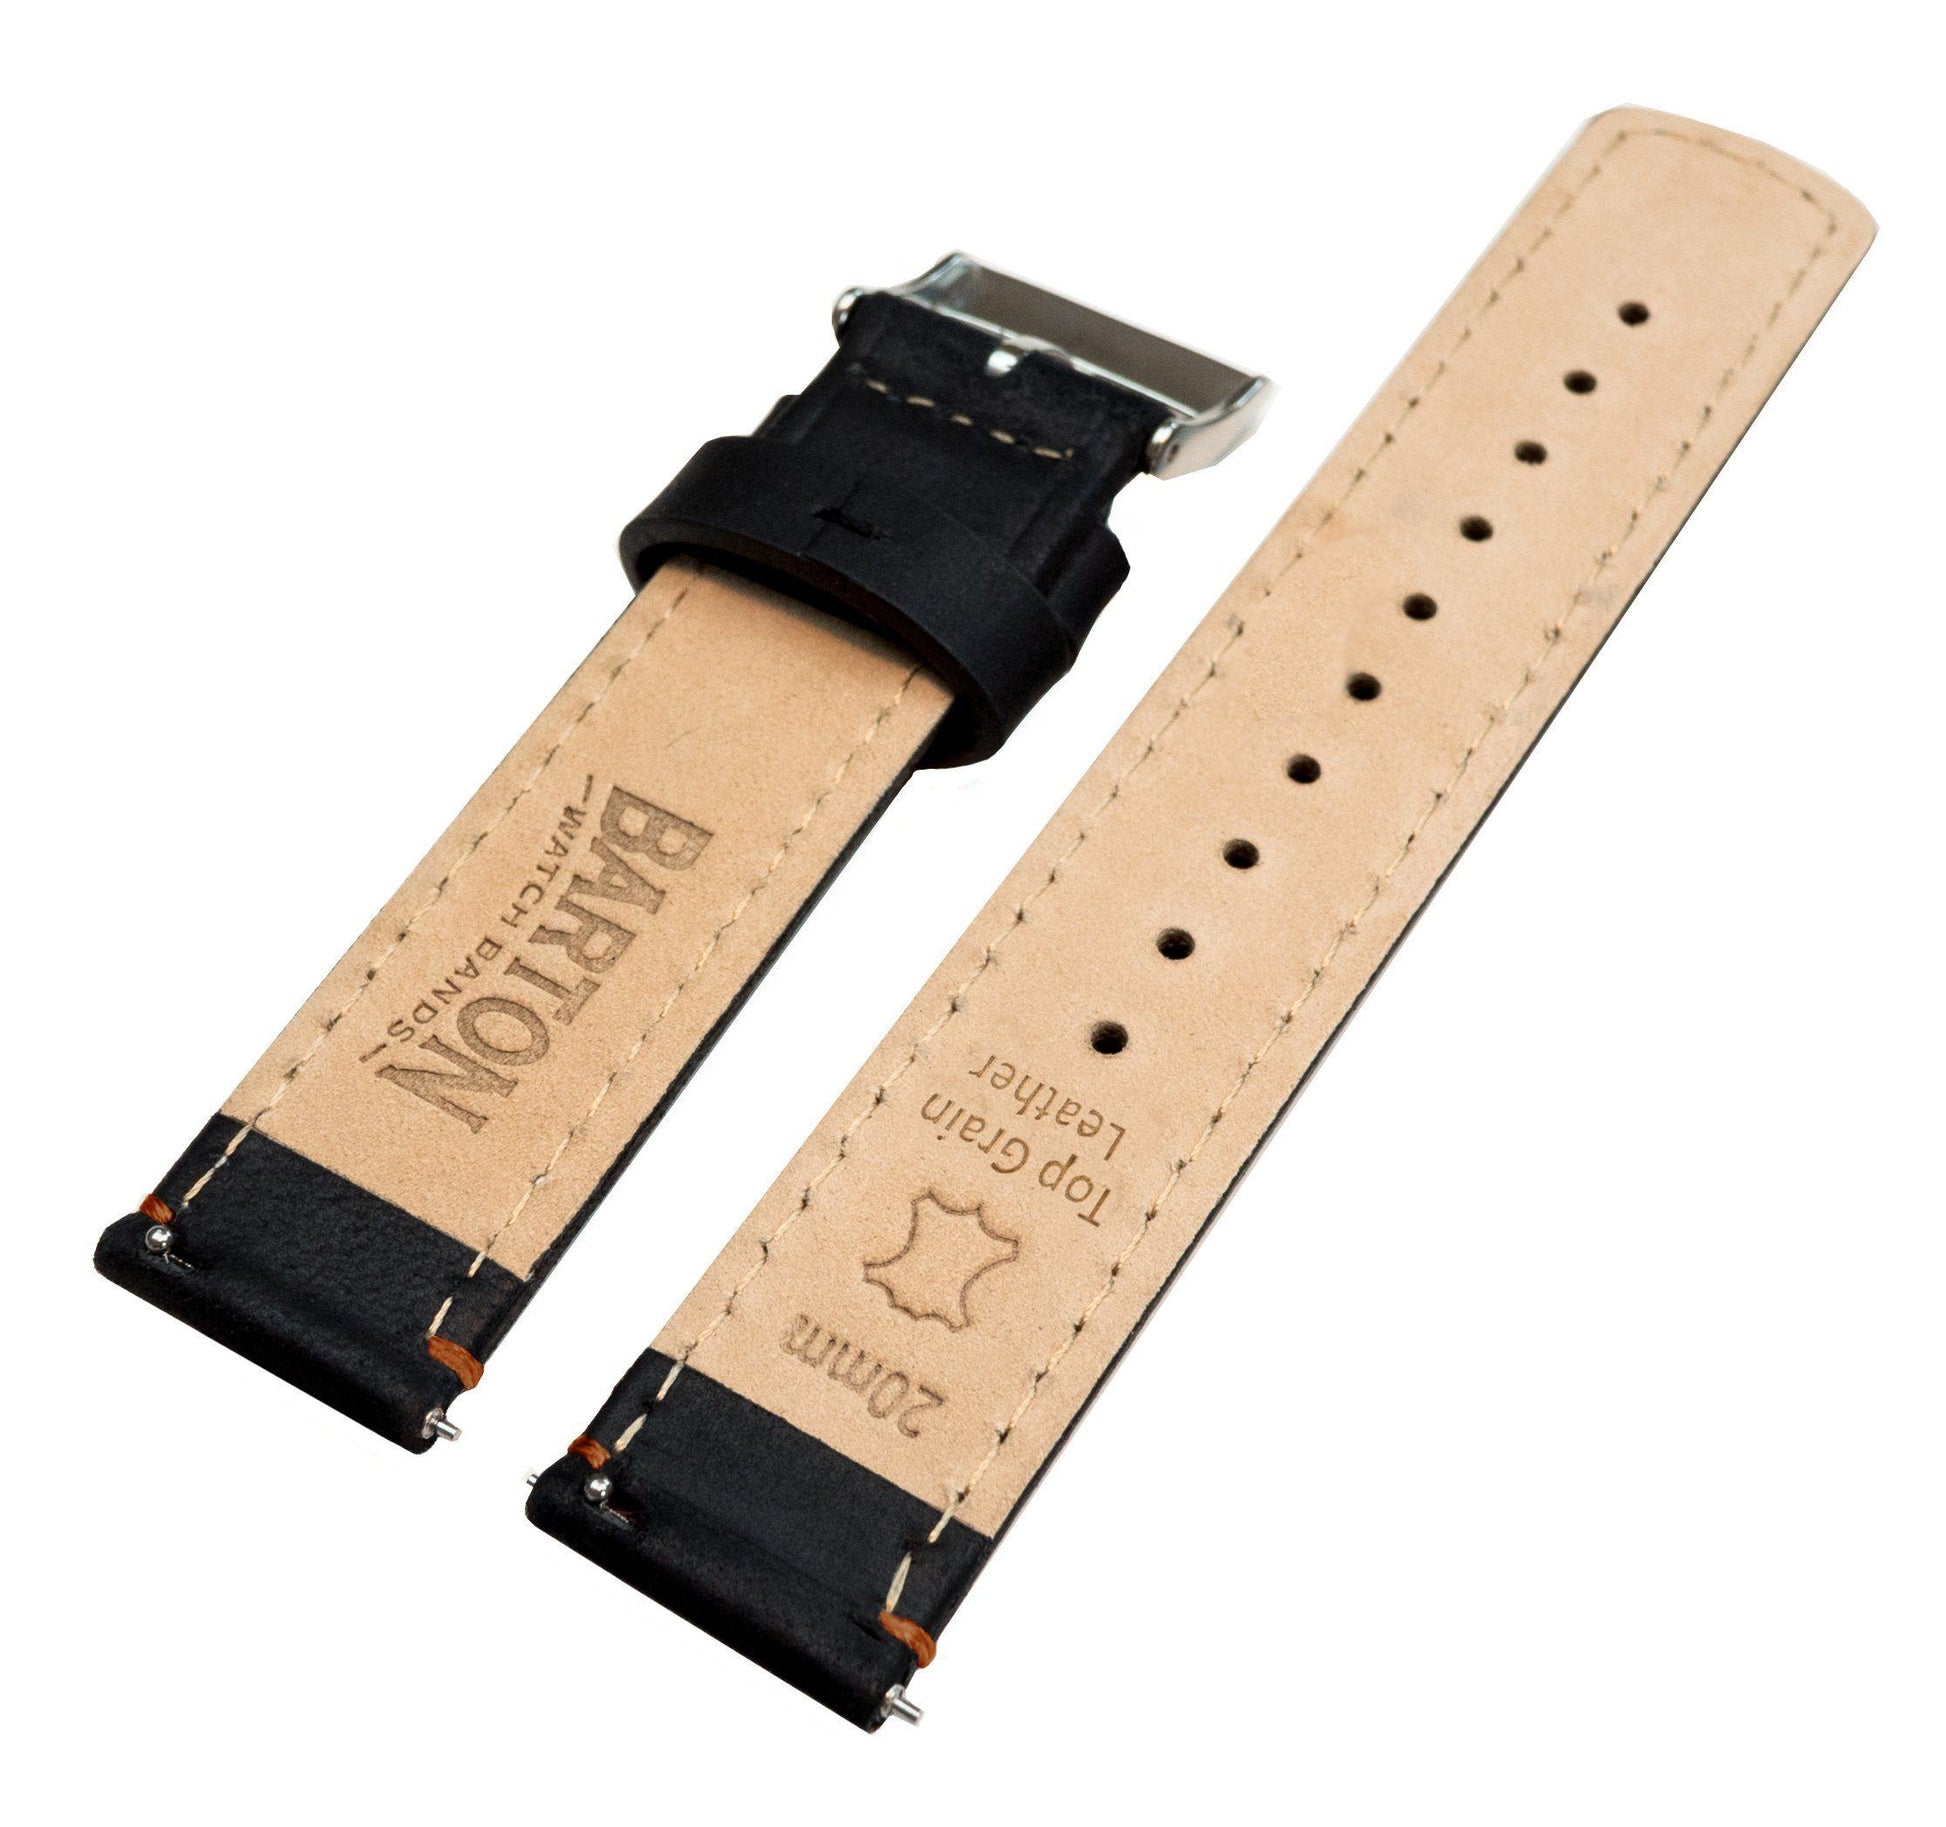 Withings Nokia Activité and Steel HR | Black Leather & Orange Stitching - Barton Watch Bands